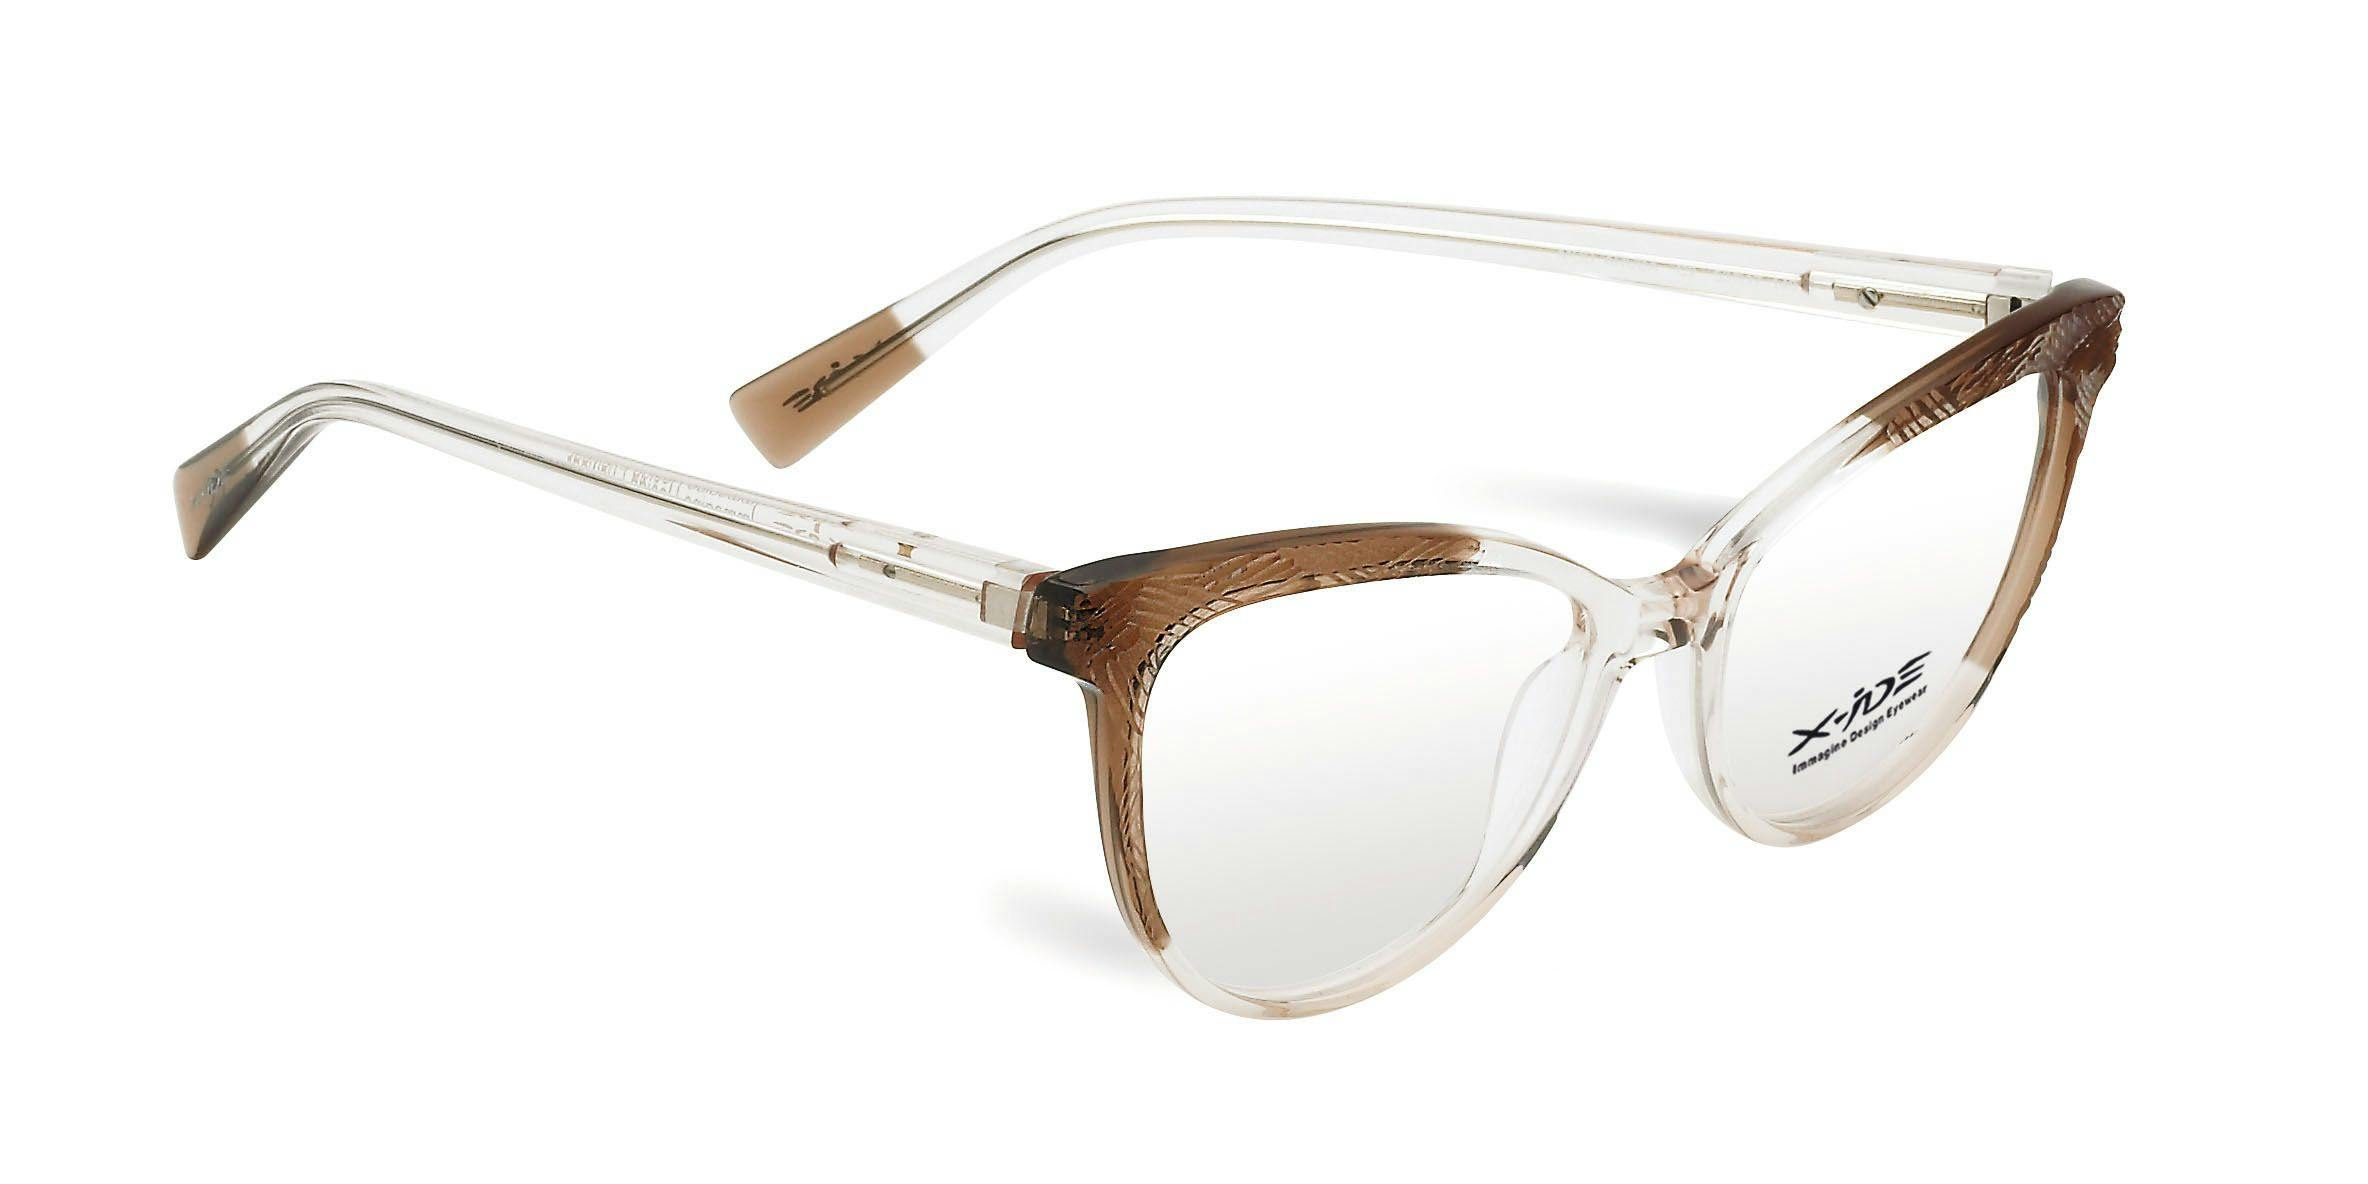 X-Ide releases new eyewear collection